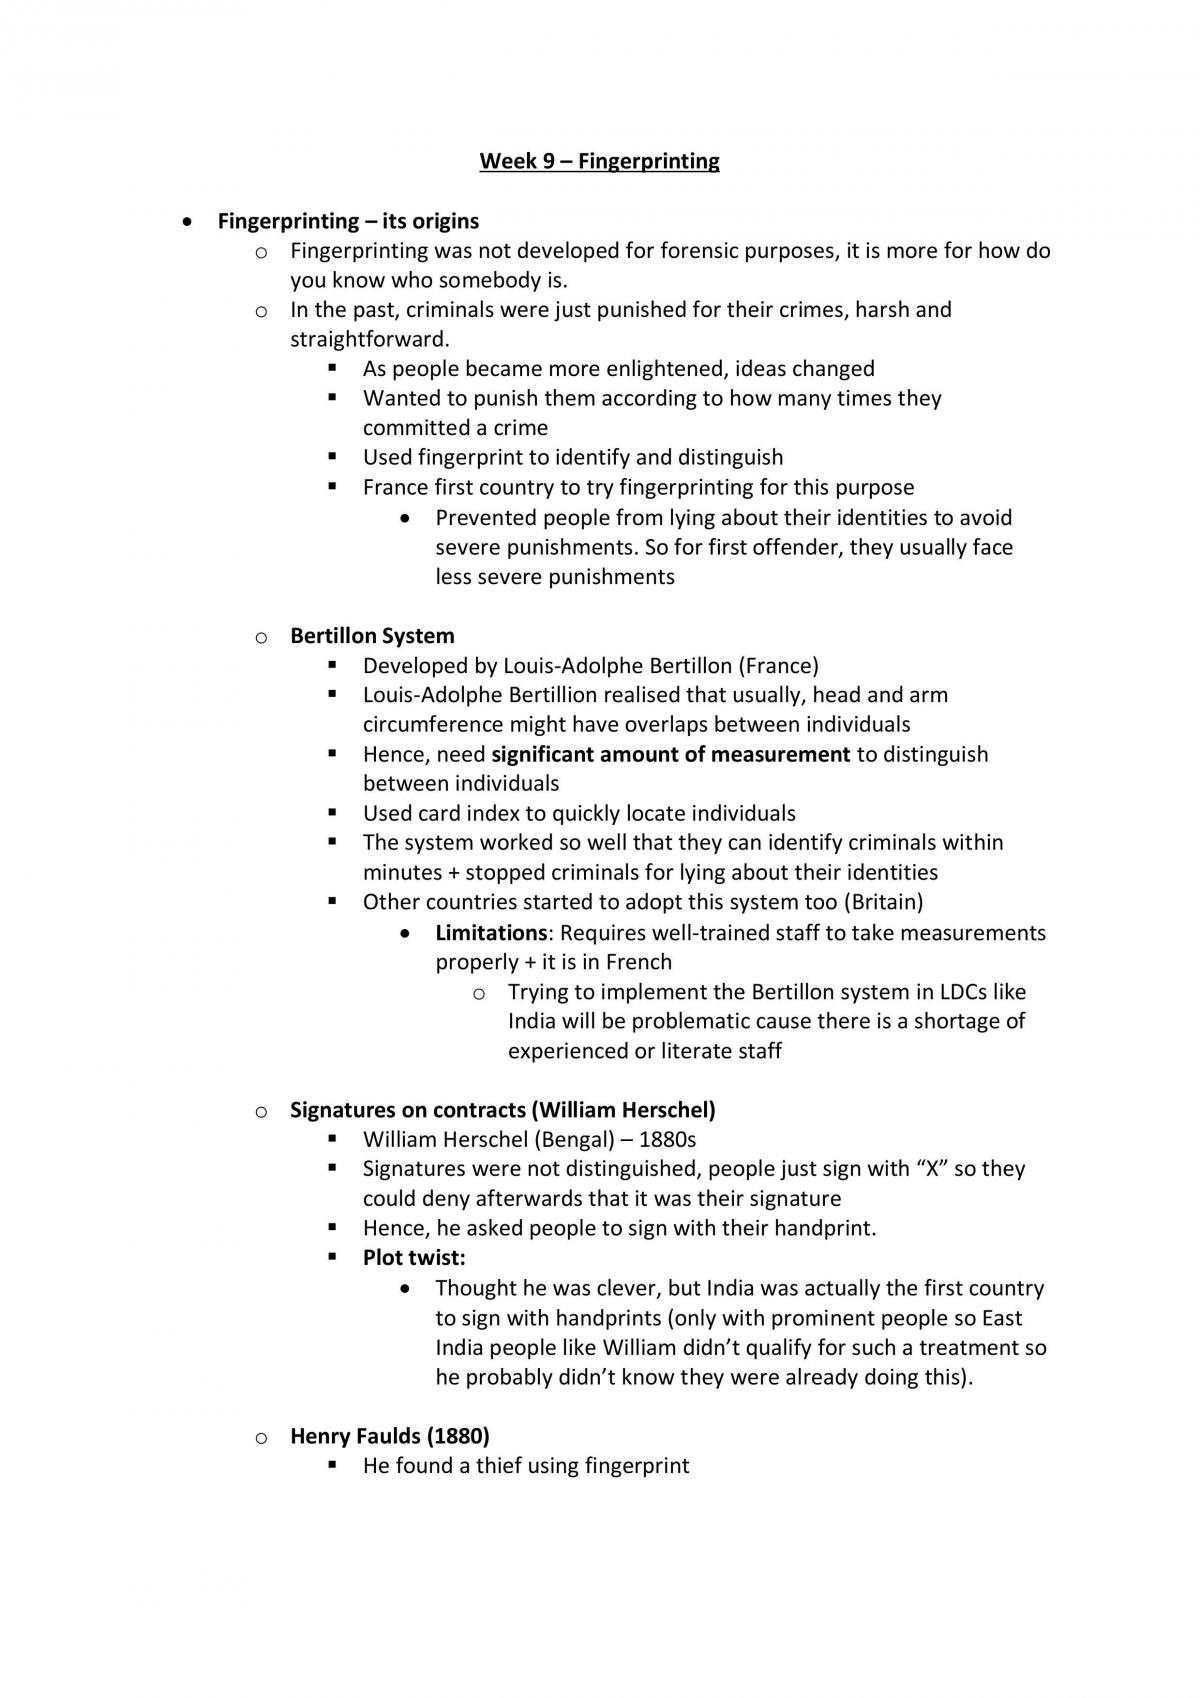 CM8002 Forensic Science Study Notes - Page 69